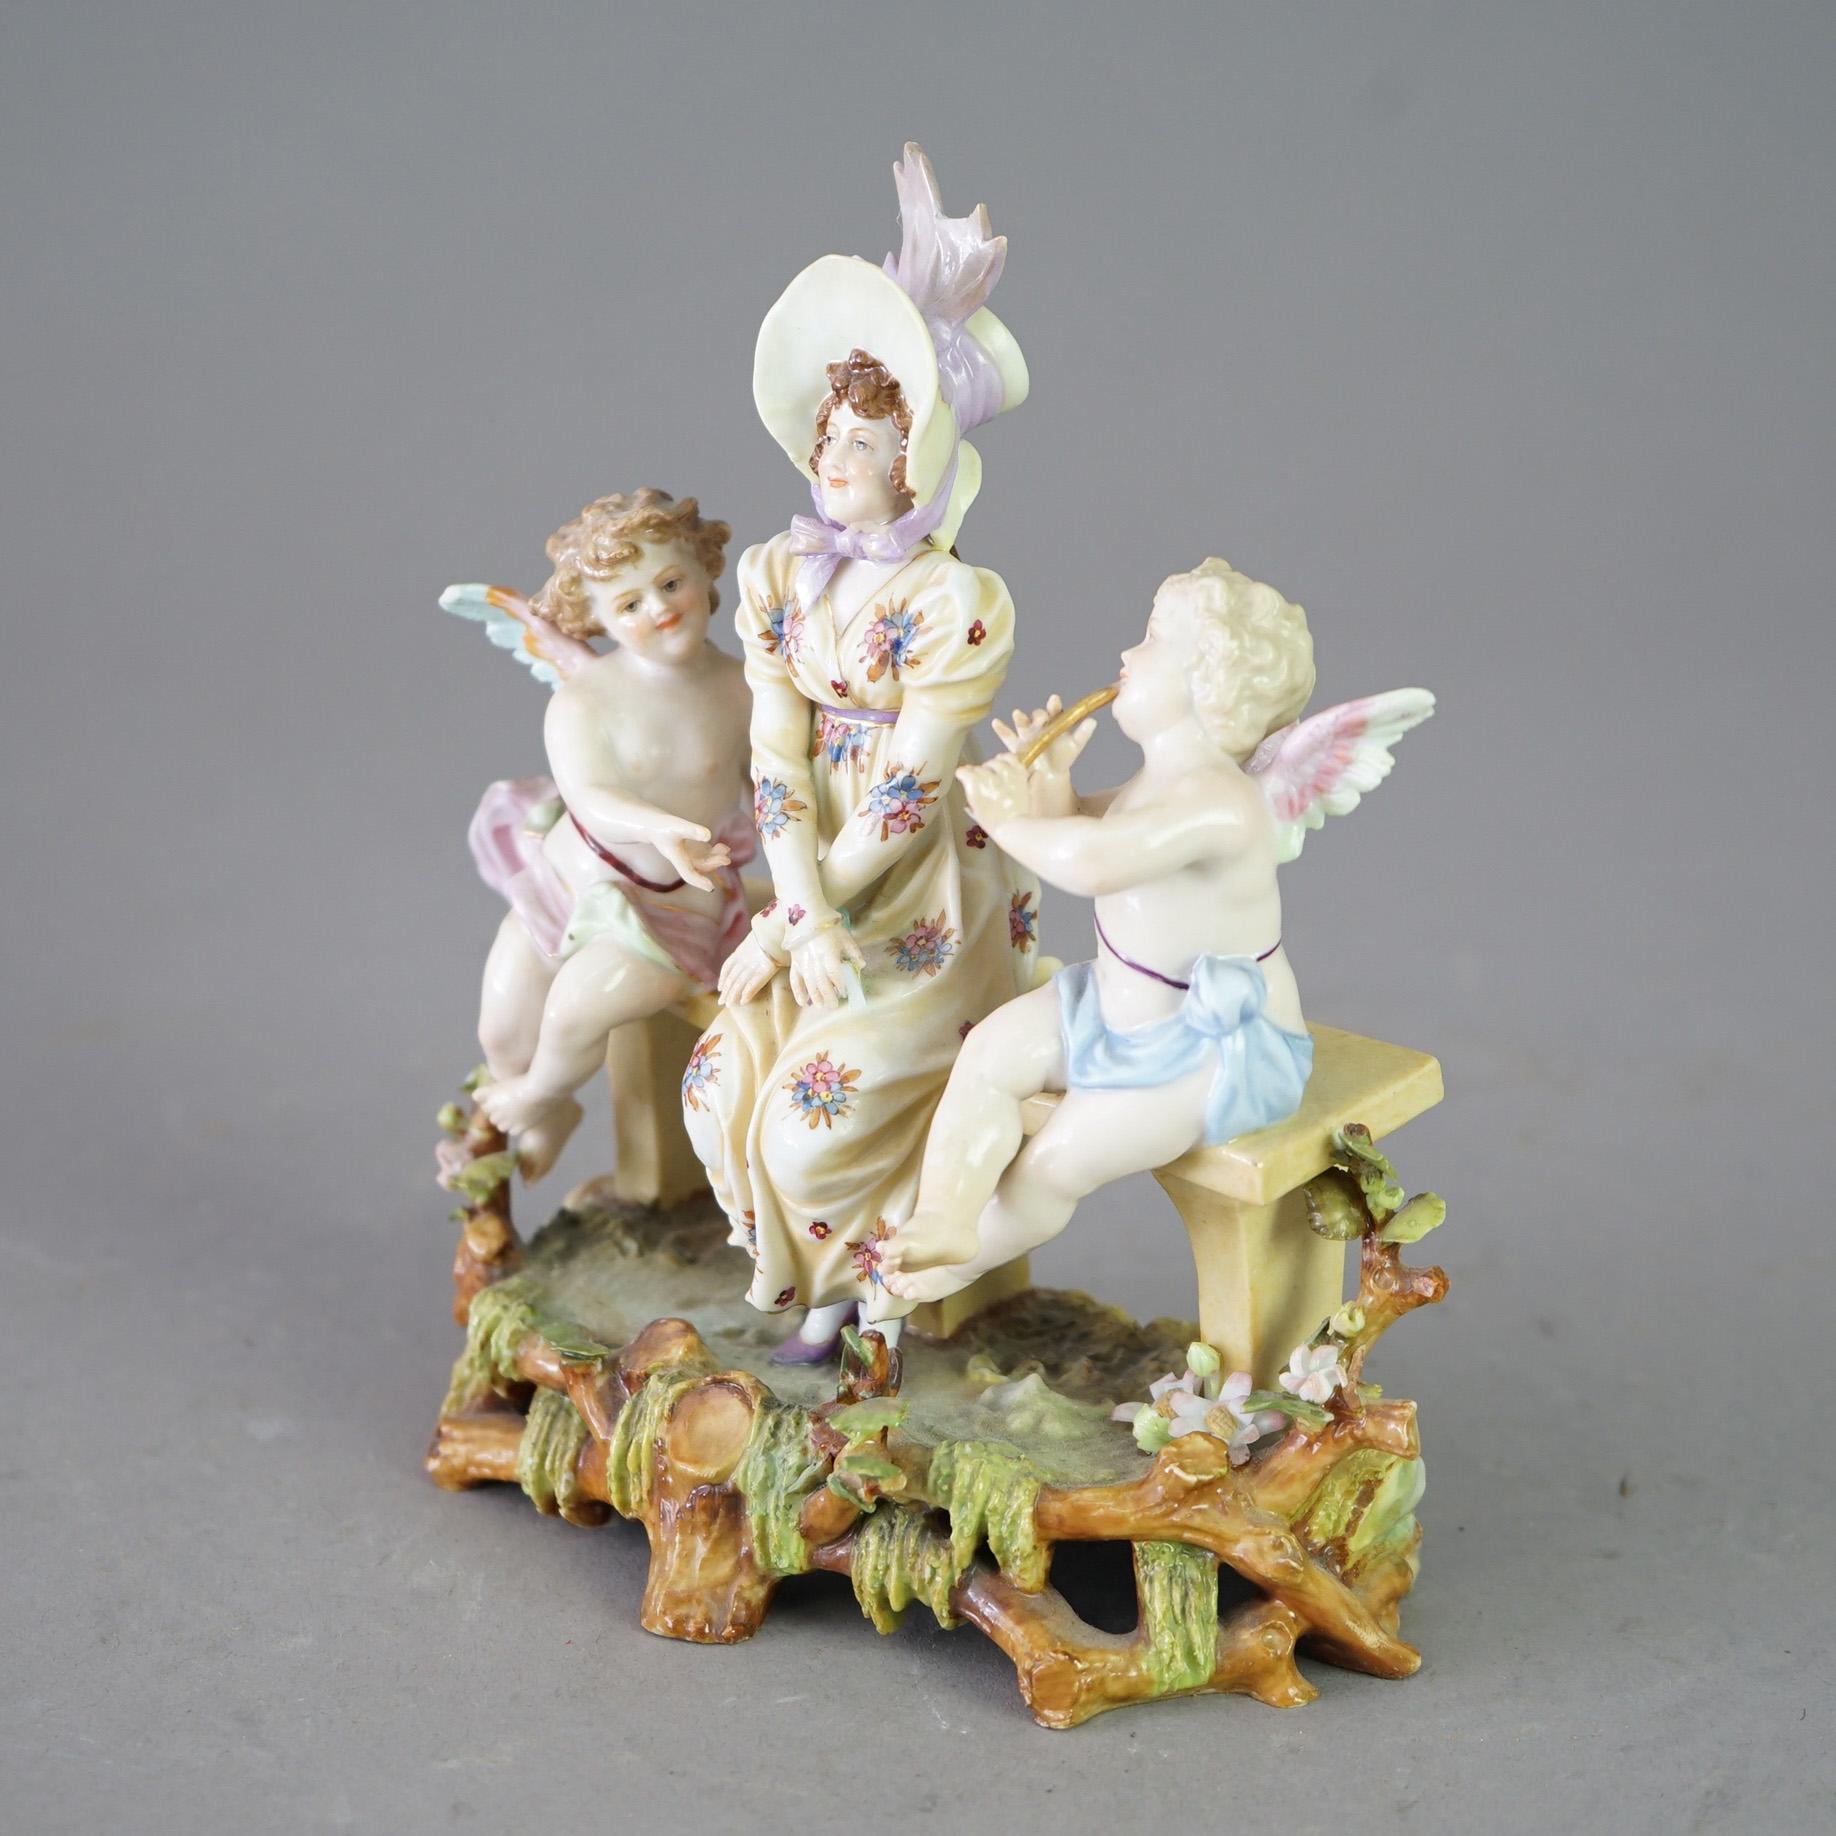 An antique German figural grouping in the manner of Meissen offers cherubs and young woman in countryside setting, hand painted with gilt highlights; maker stamp as photographed; 20th century

Measures - 6.75